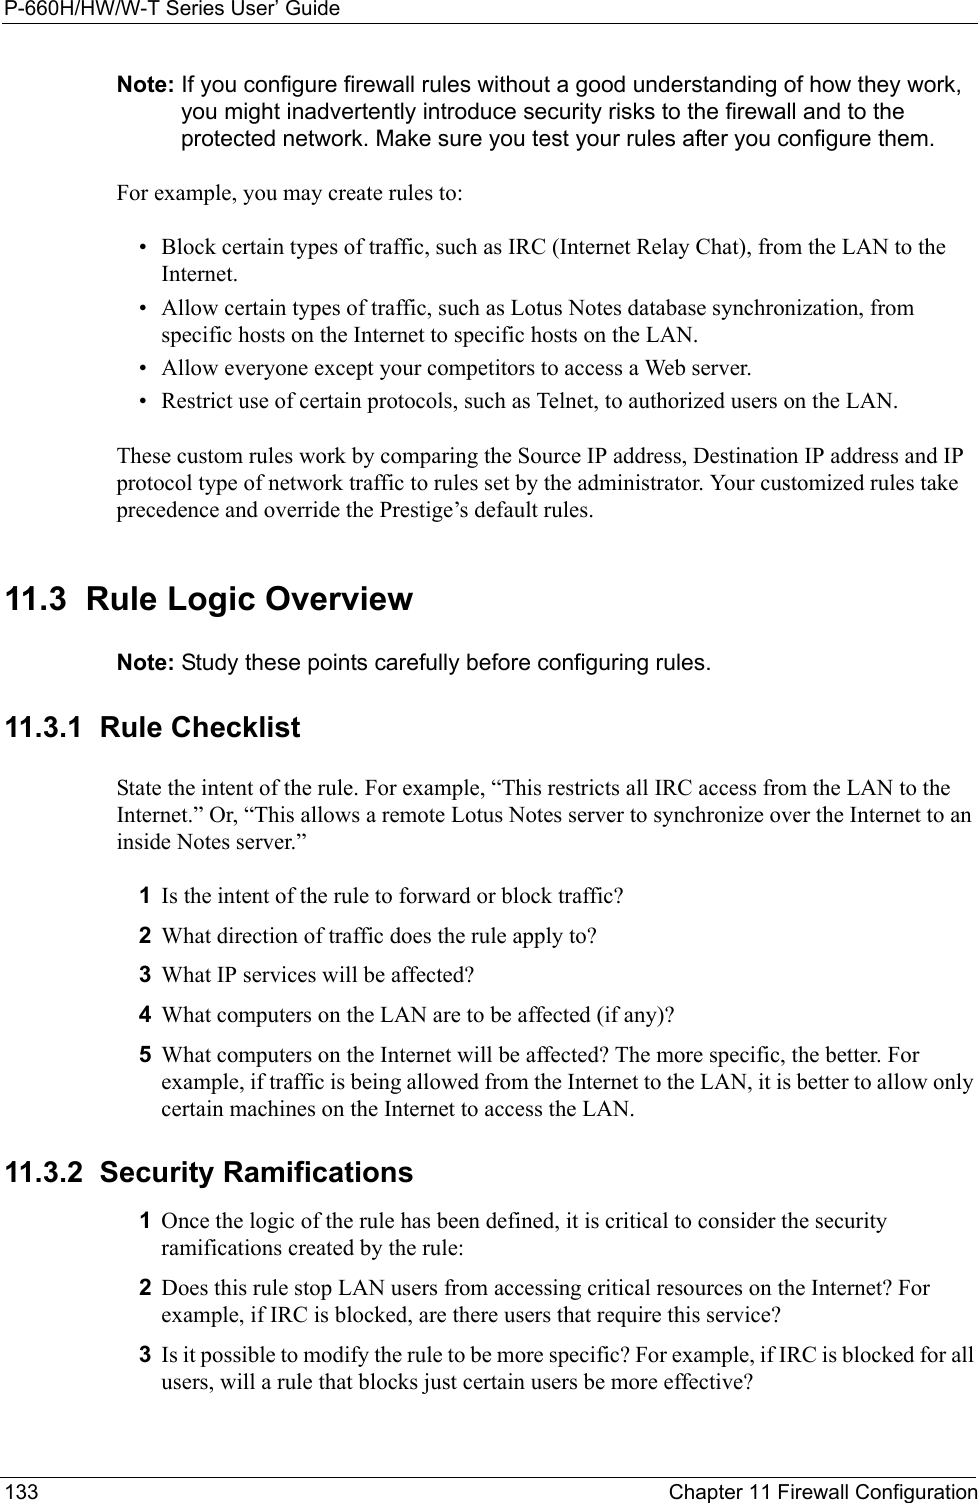 P-660H/HW/W-T Series User’ Guide133 Chapter 11 Firewall ConfigurationNote: If you configure firewall rules without a good understanding of how they work, you might inadvertently introduce security risks to the firewall and to the protected network. Make sure you test your rules after you configure them.For example, you may create rules to:• Block certain types of traffic, such as IRC (Internet Relay Chat), from the LAN to the Internet.• Allow certain types of traffic, such as Lotus Notes database synchronization, from specific hosts on the Internet to specific hosts on the LAN.• Allow everyone except your competitors to access a Web server.• Restrict use of certain protocols, such as Telnet, to authorized users on the LAN.These custom rules work by comparing the Source IP address, Destination IP address and IP protocol type of network traffic to rules set by the administrator. Your customized rules take precedence and override the Prestige’s default rules. 11.3  Rule Logic Overview  Note: Study these points carefully before configuring rules.11.3.1  Rule ChecklistState the intent of the rule. For example, “This restricts all IRC access from the LAN to the Internet.” Or, “This allows a remote Lotus Notes server to synchronize over the Internet to an inside Notes server.”1Is the intent of the rule to forward or block traffic?2What direction of traffic does the rule apply to?3What IP services will be affected?4What computers on the LAN are to be affected (if any)?5What computers on the Internet will be affected? The more specific, the better. For example, if traffic is being allowed from the Internet to the LAN, it is better to allow only certain machines on the Internet to access the LAN.11.3.2  Security Ramifications1Once the logic of the rule has been defined, it is critical to consider the security ramifications created by the rule:2Does this rule stop LAN users from accessing critical resources on the Internet? For example, if IRC is blocked, are there users that require this service?3Is it possible to modify the rule to be more specific? For example, if IRC is blocked for all users, will a rule that blocks just certain users be more effective?